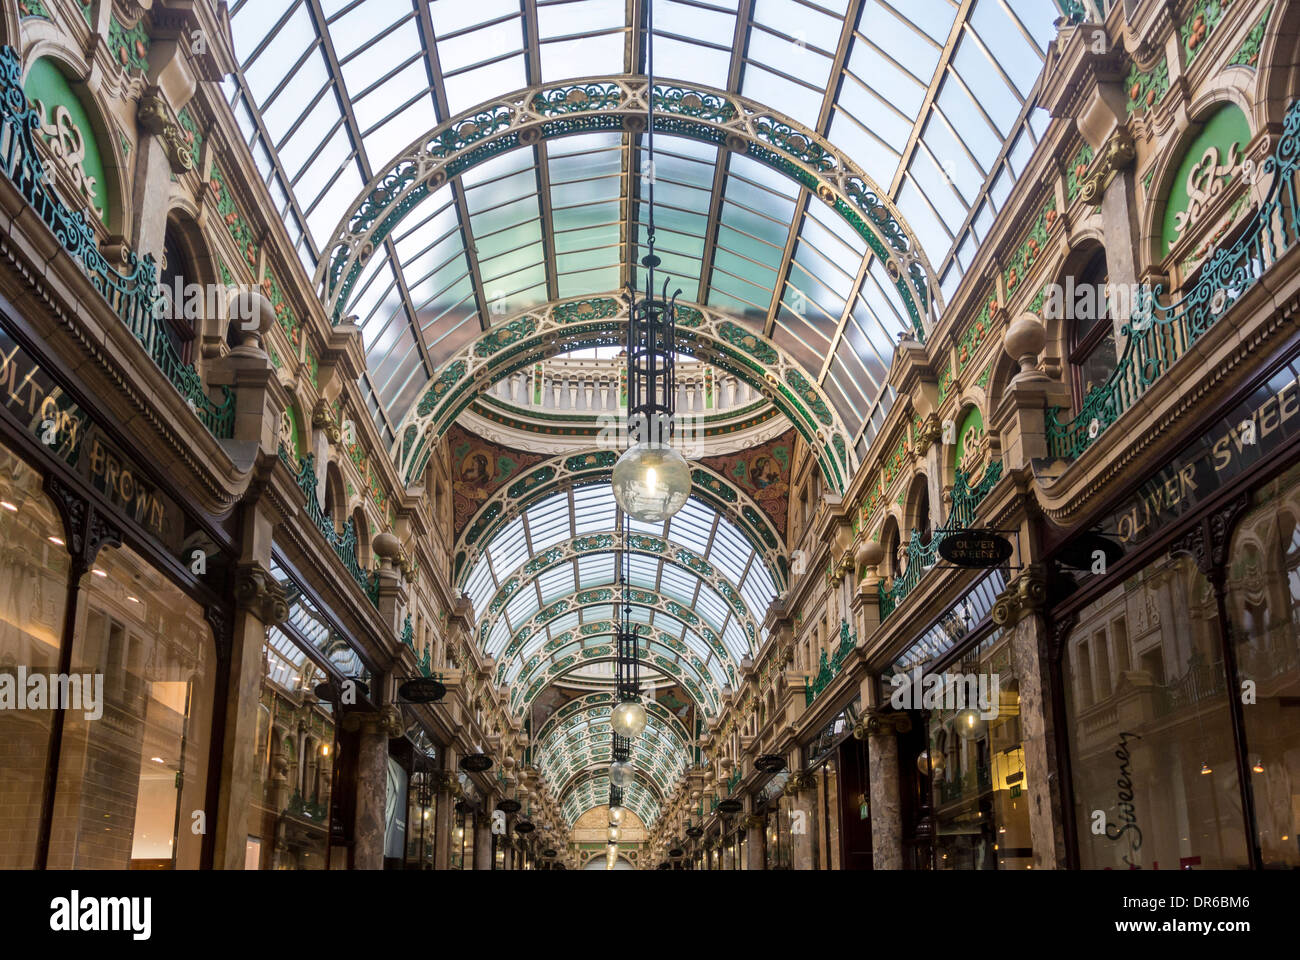 Ornate cast-iron segmental-arched roof trusses seen from the interior of County Arcade, Victoria Quarter, Leeds. Stock Photo